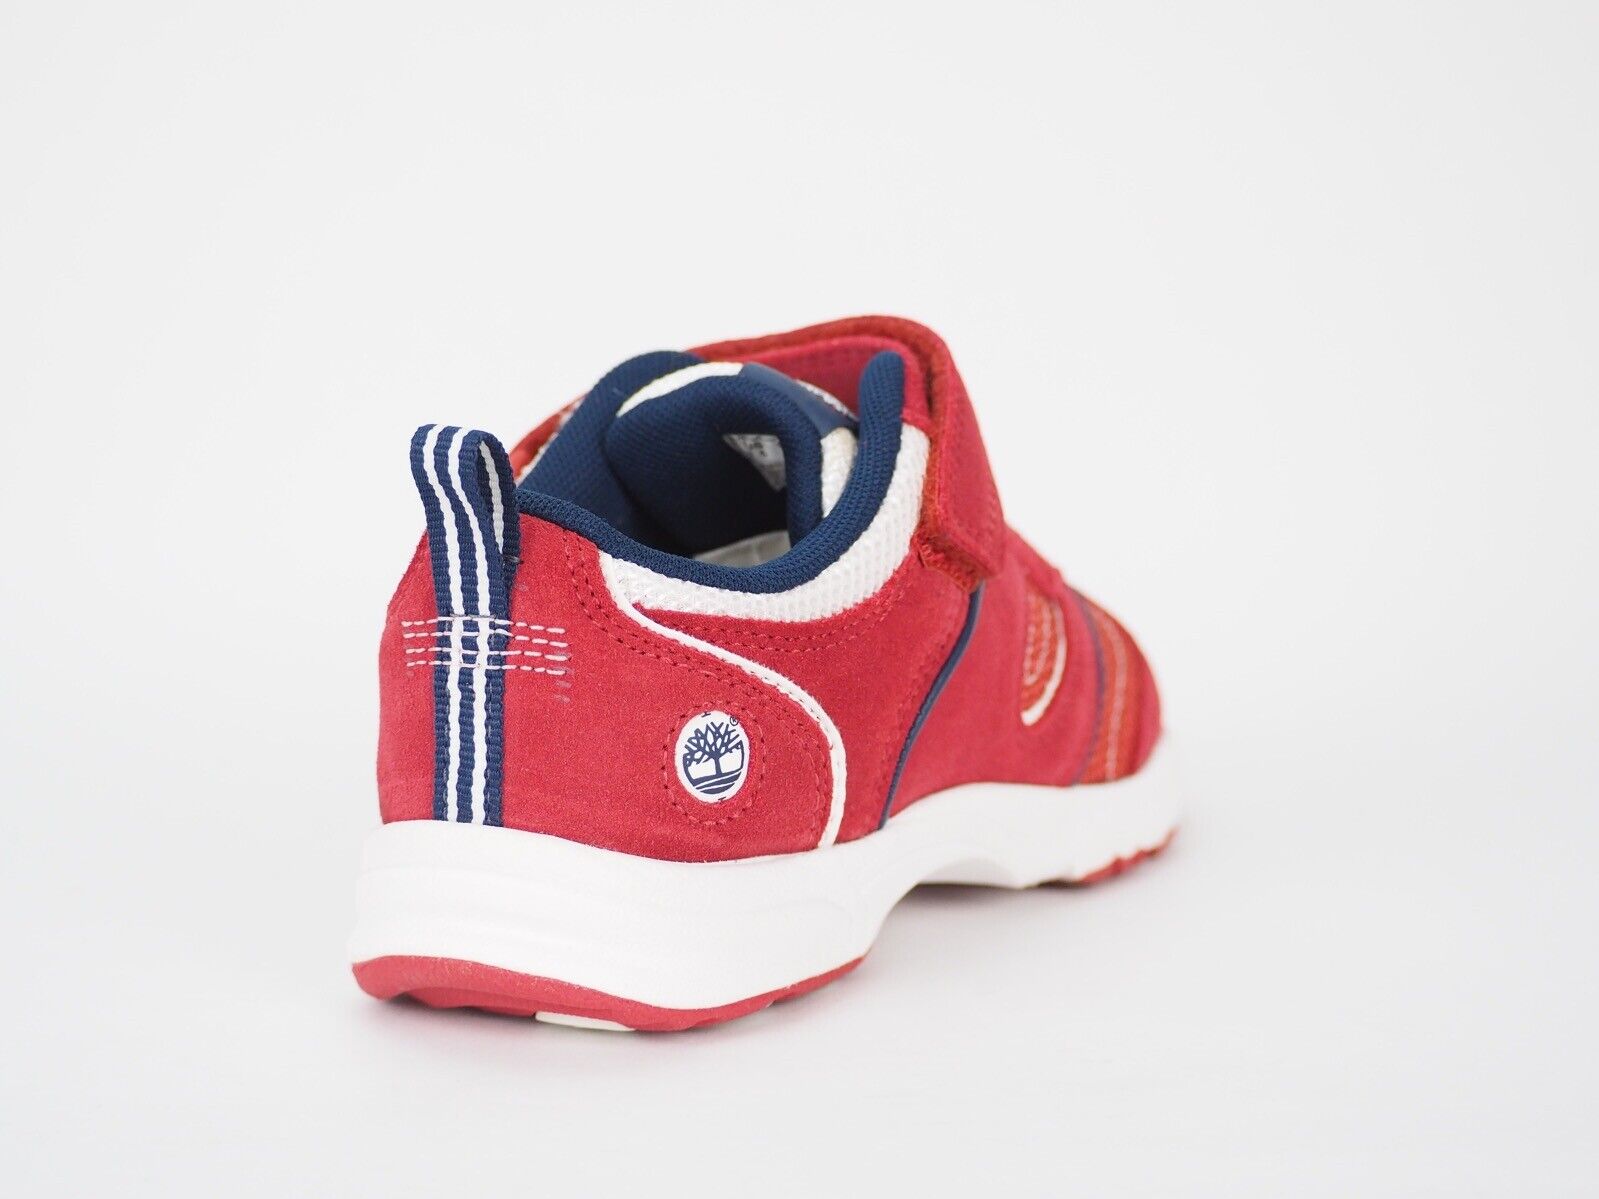 Boys Timberland Trailfinder 51772 Red Leather Casual Sports Shoes Kids Trainers - London Top Style